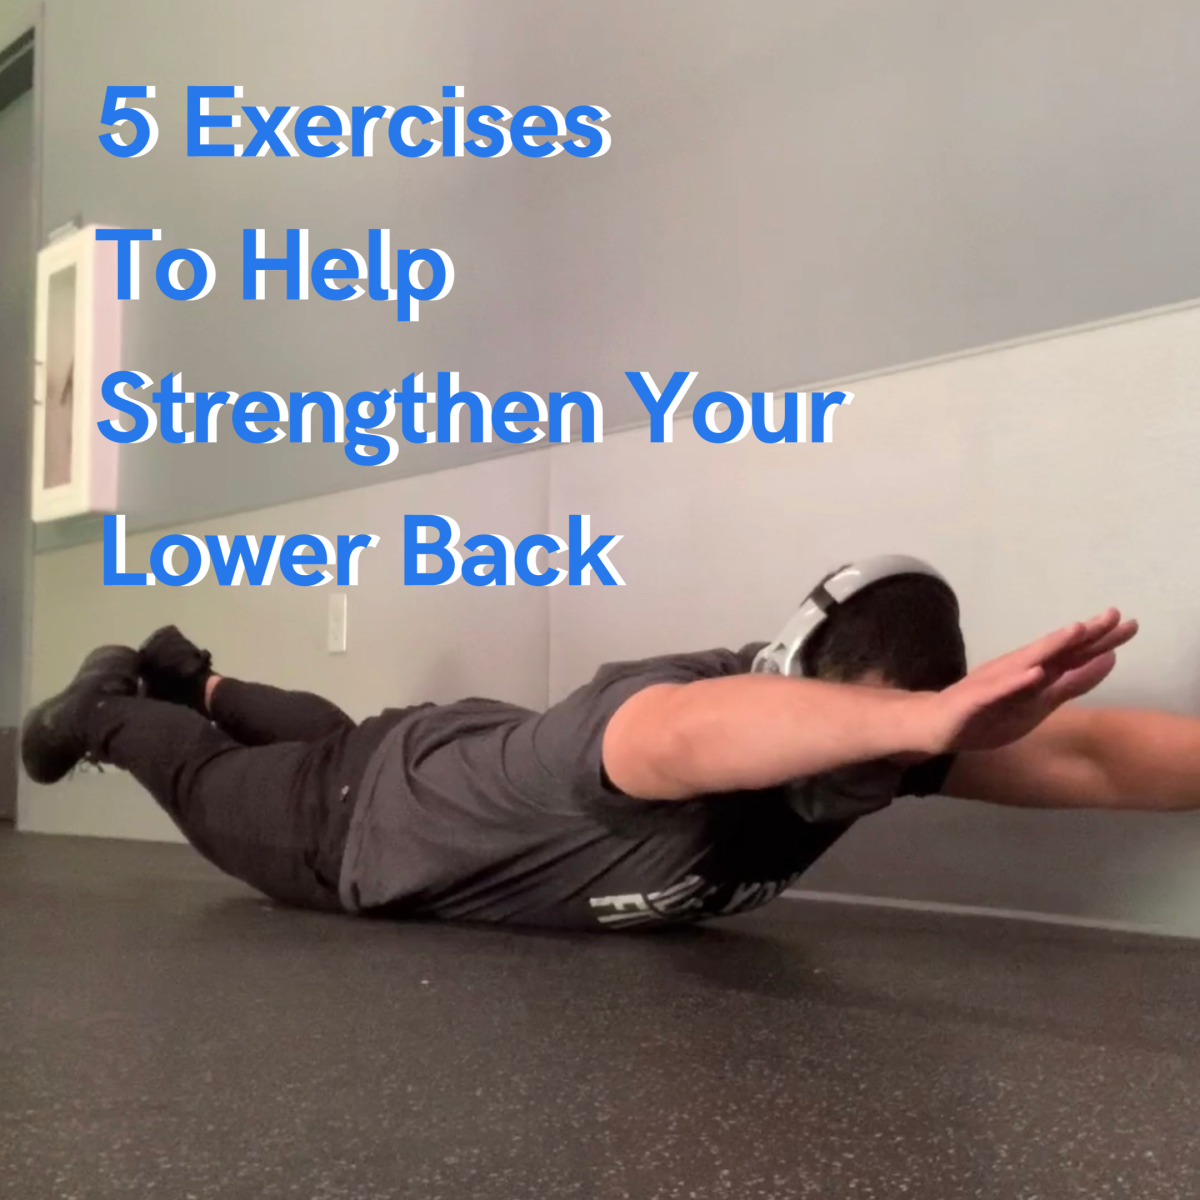 5 Exercises To Help Strengthen Your Lower Back